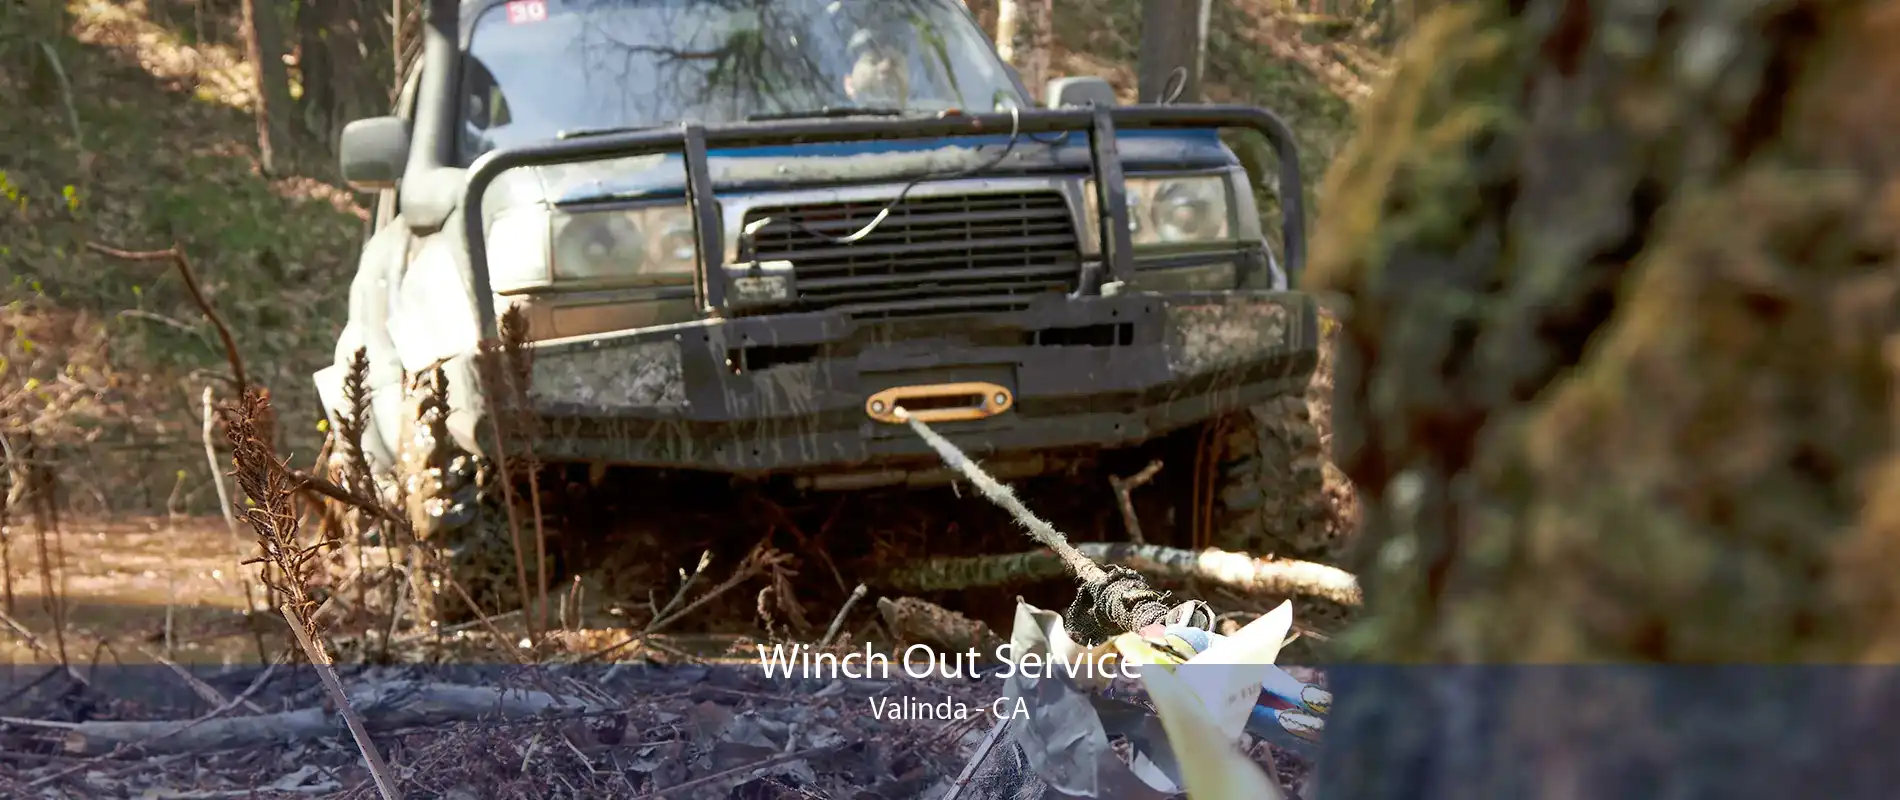 Winch Out Service Valinda - CA